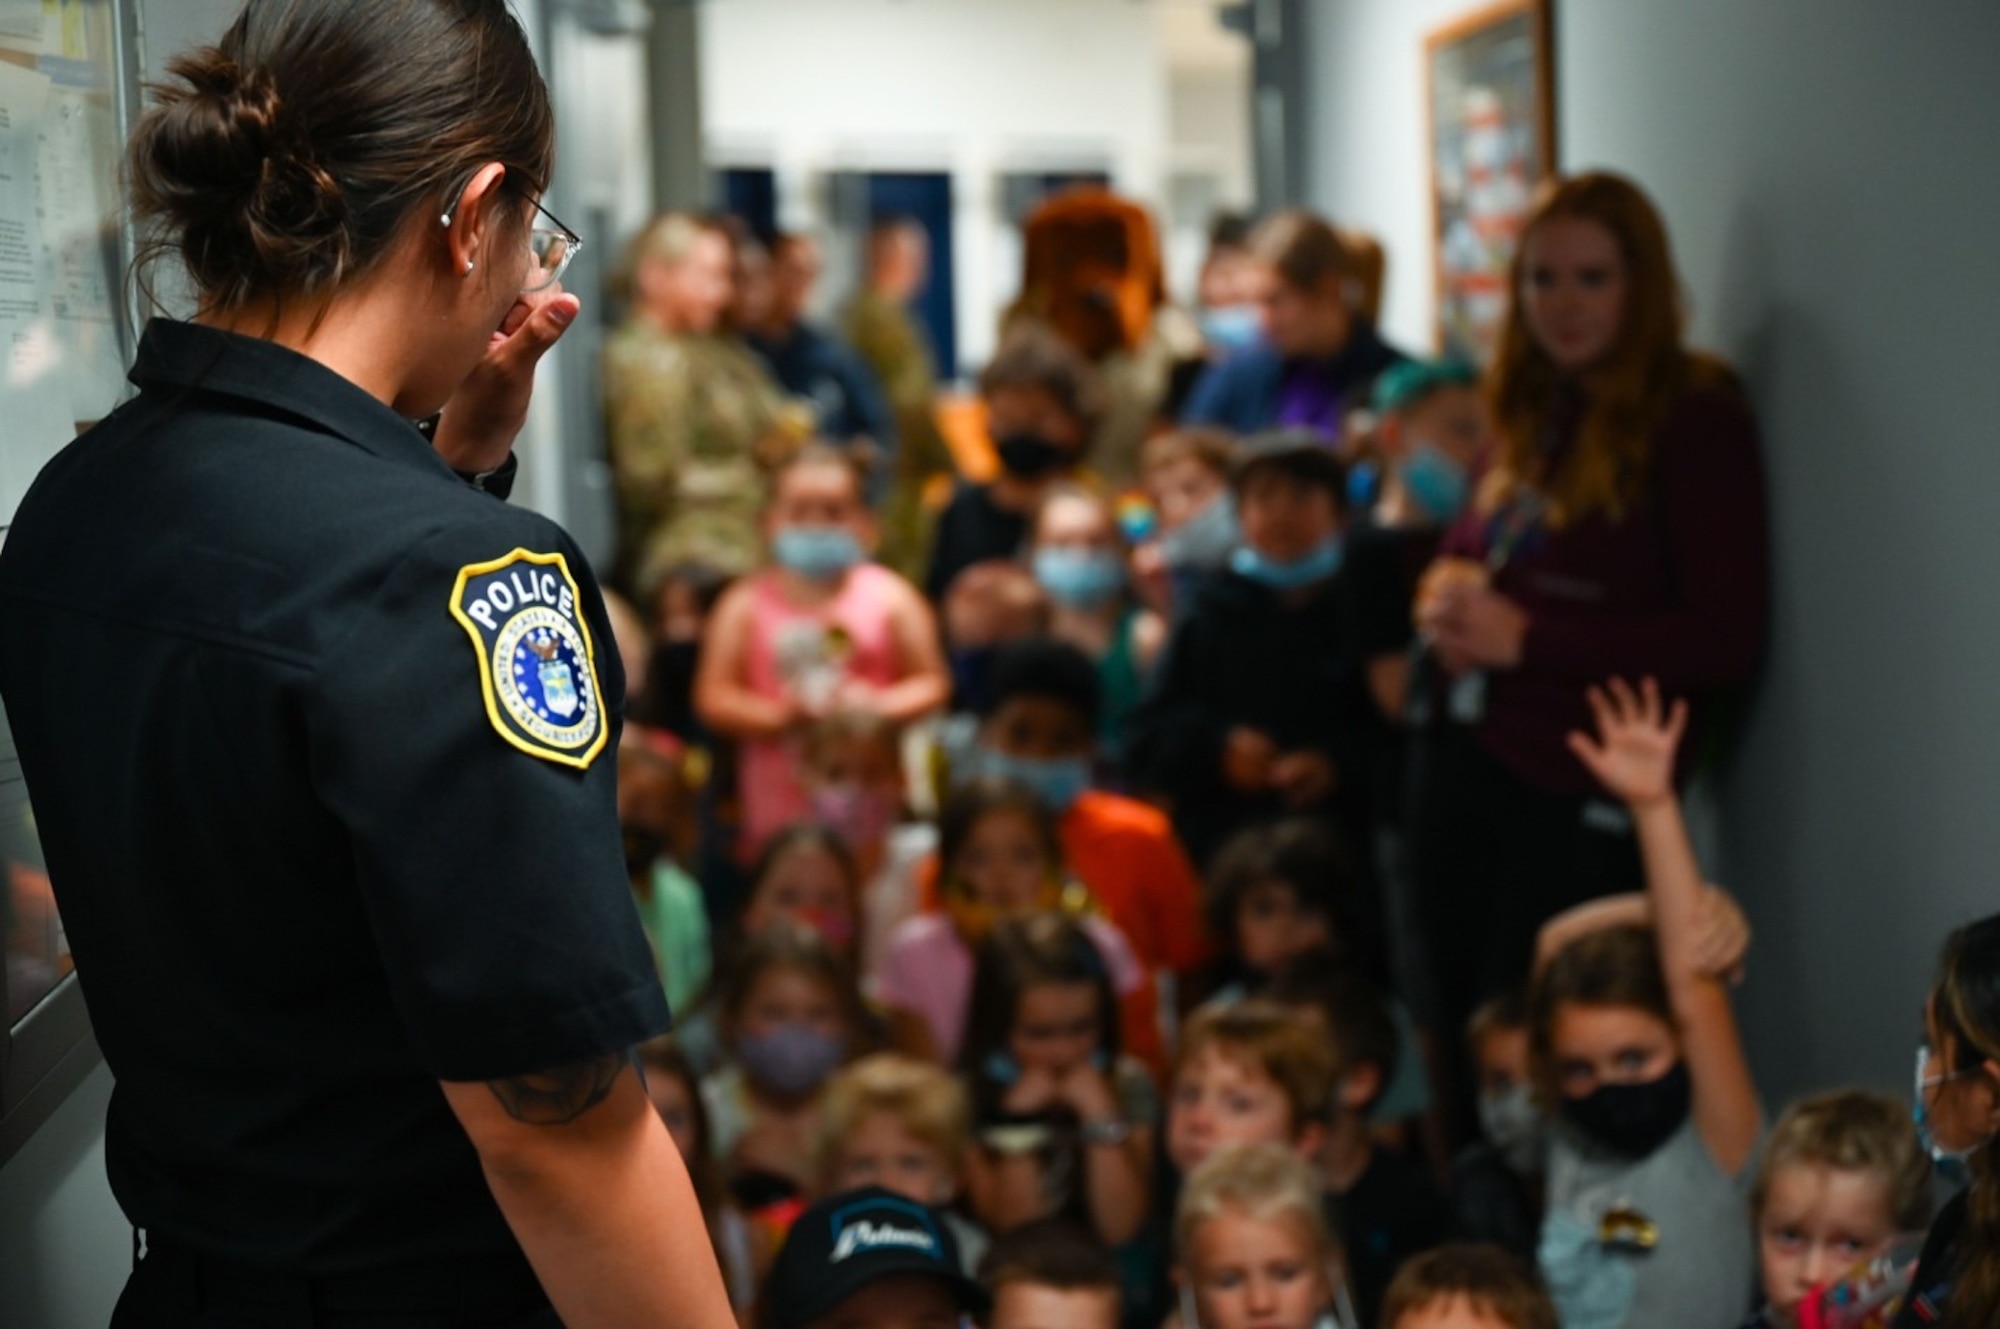 Nikki McManigal, a security forces leader assigned to the 28th Security Forces Squadron, answers questions from children of the Ellsworth School Age Care program during a visit on Ellsworth Air Force Base, S.D., June 25, 2021